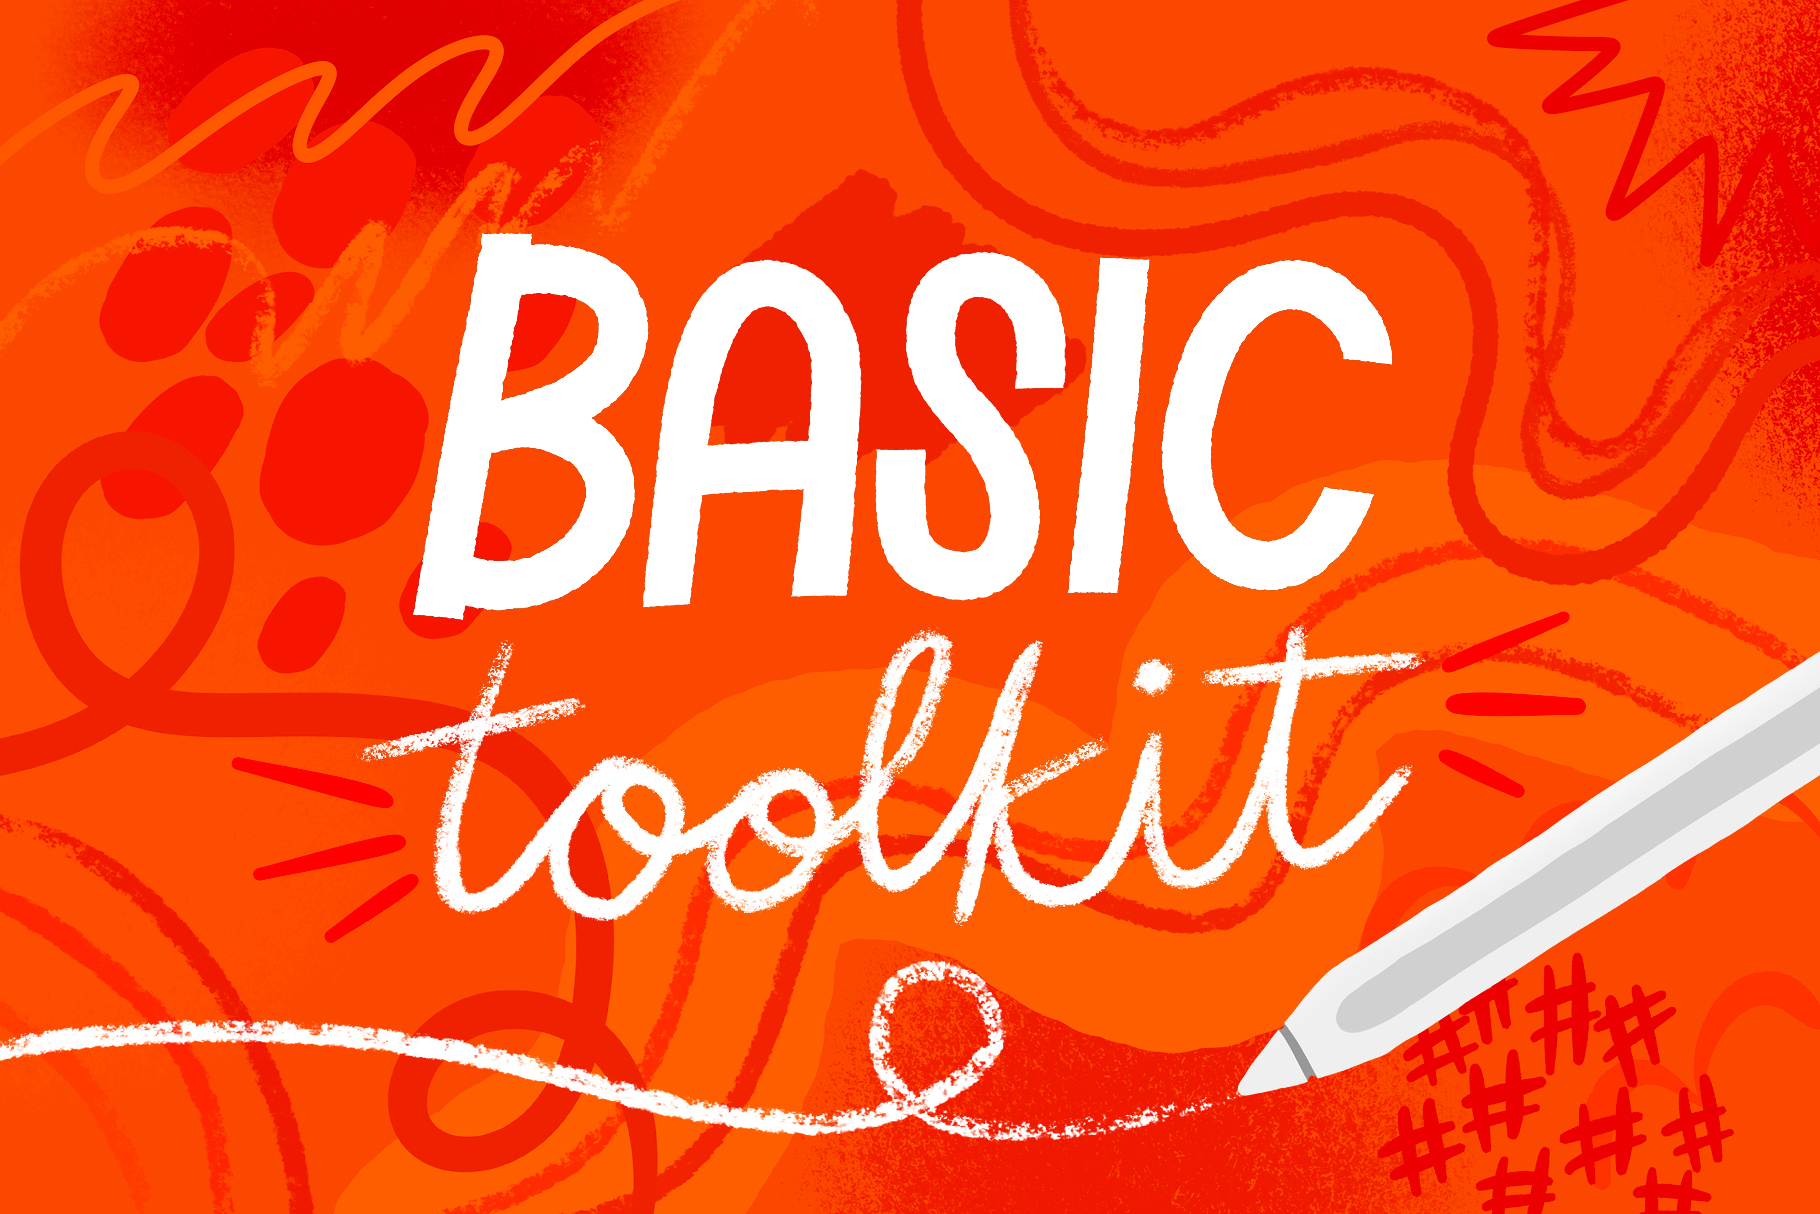 Basic Toolkit Essential brushes for Procreate by Bardot Brush